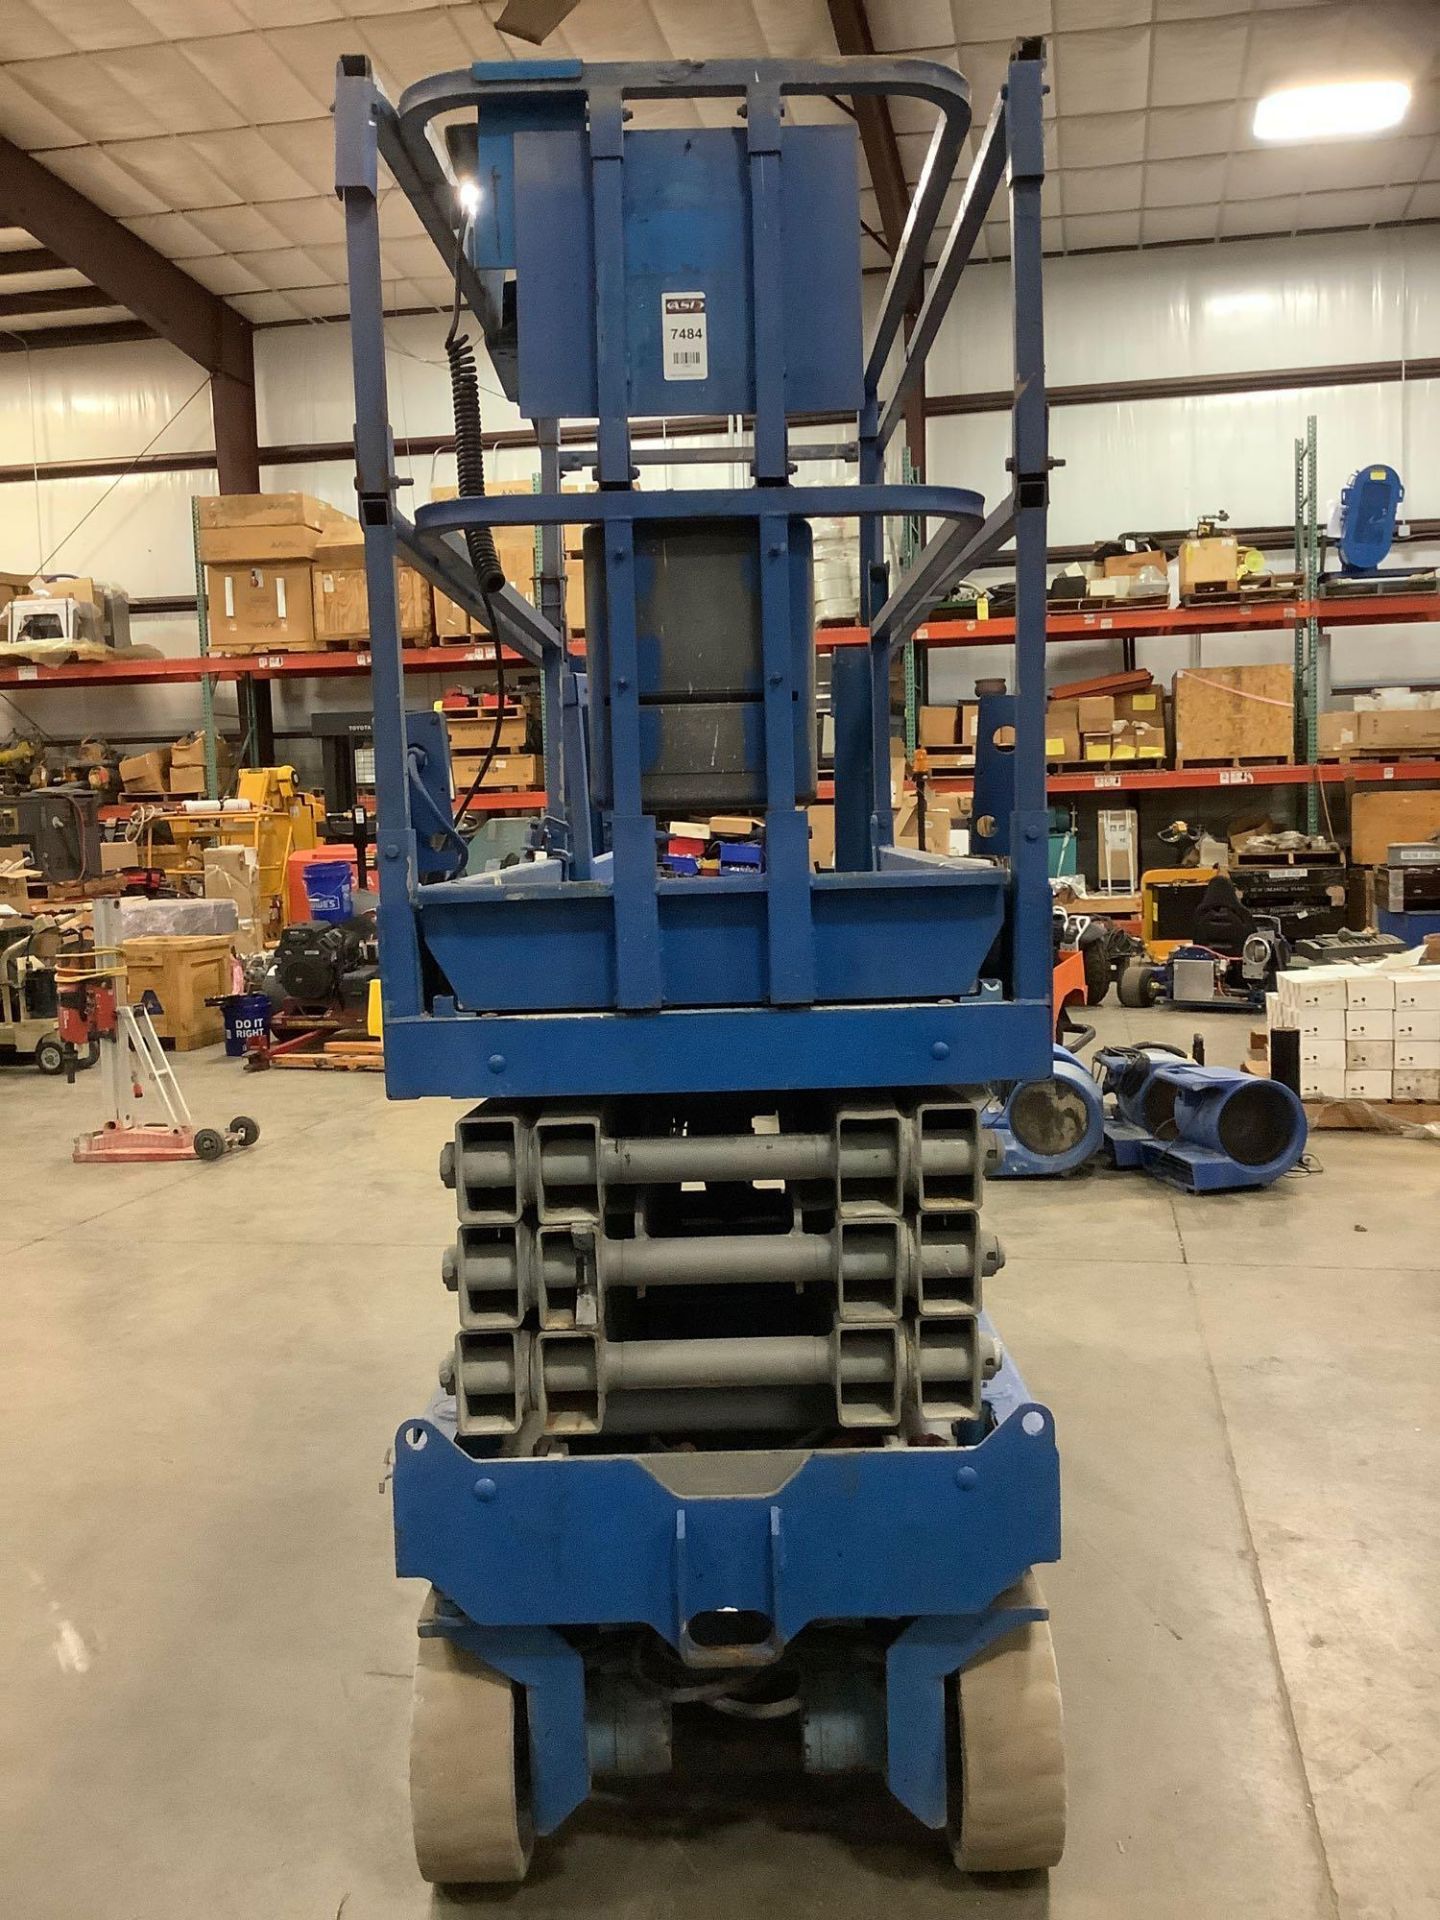 GENIE SCISSOR LIFT MODEL GS-2632, ELECTRIC, APPROX MAX PLATFORM HEIGHT 26FT, NON MARKING TIRES, BUIL - Image 10 of 13